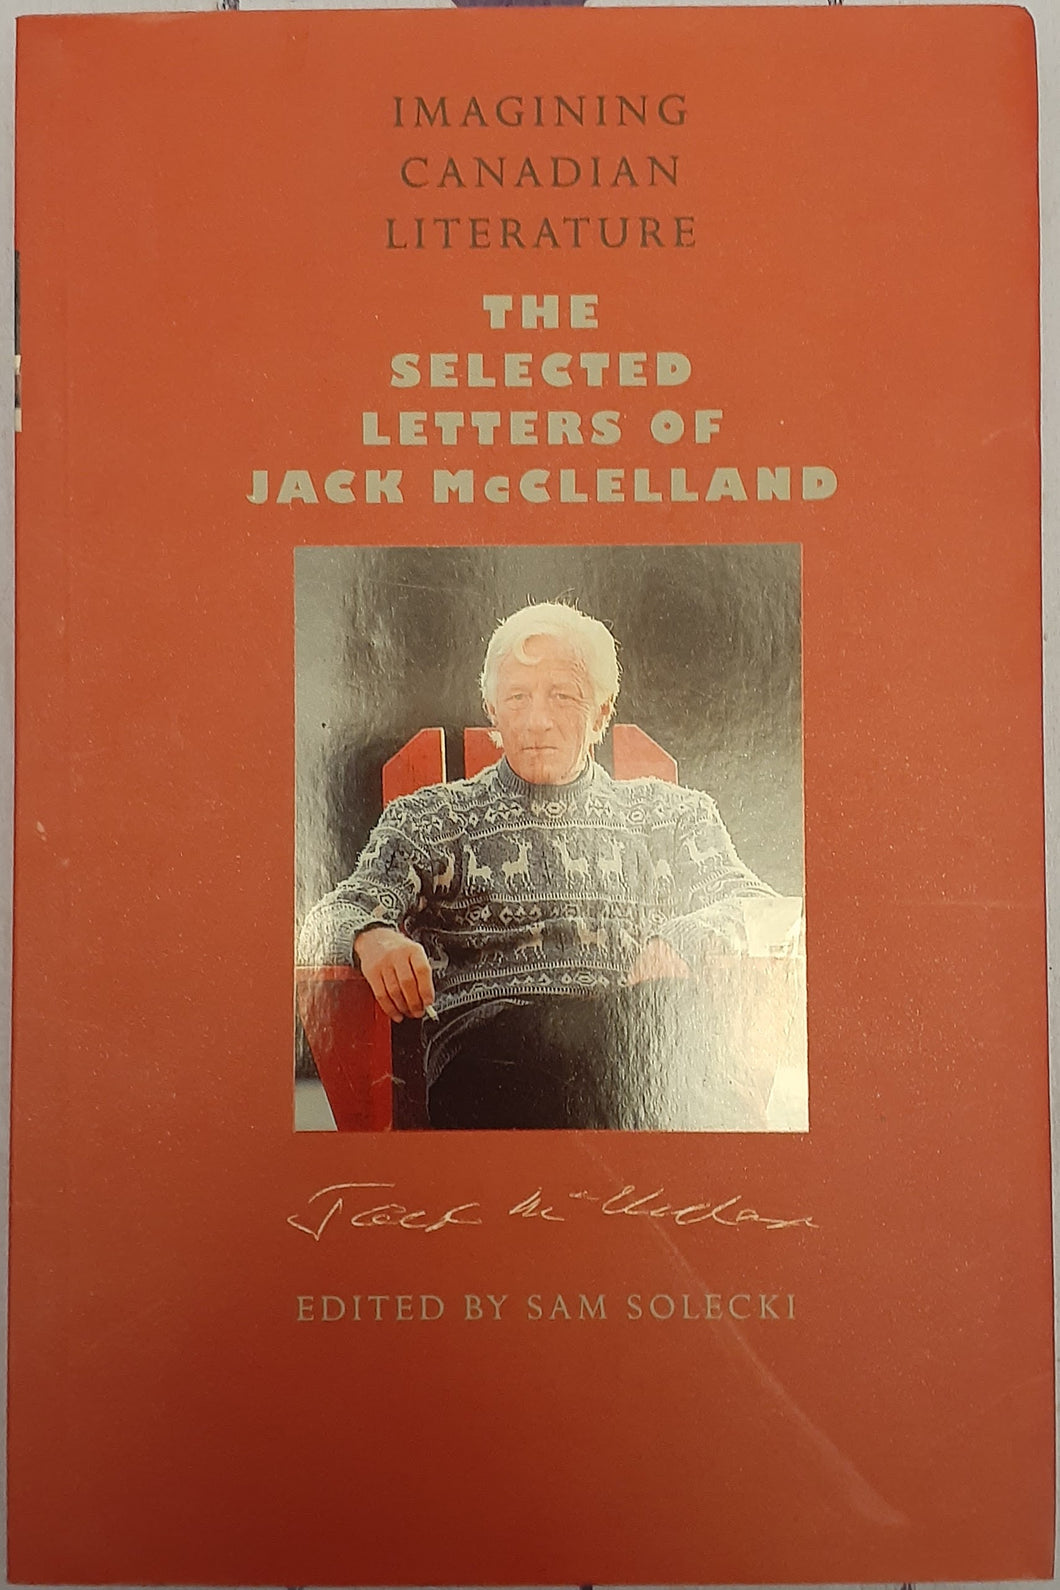 Imagining Canadian Literature: The Selected Letters of Jack McClelland